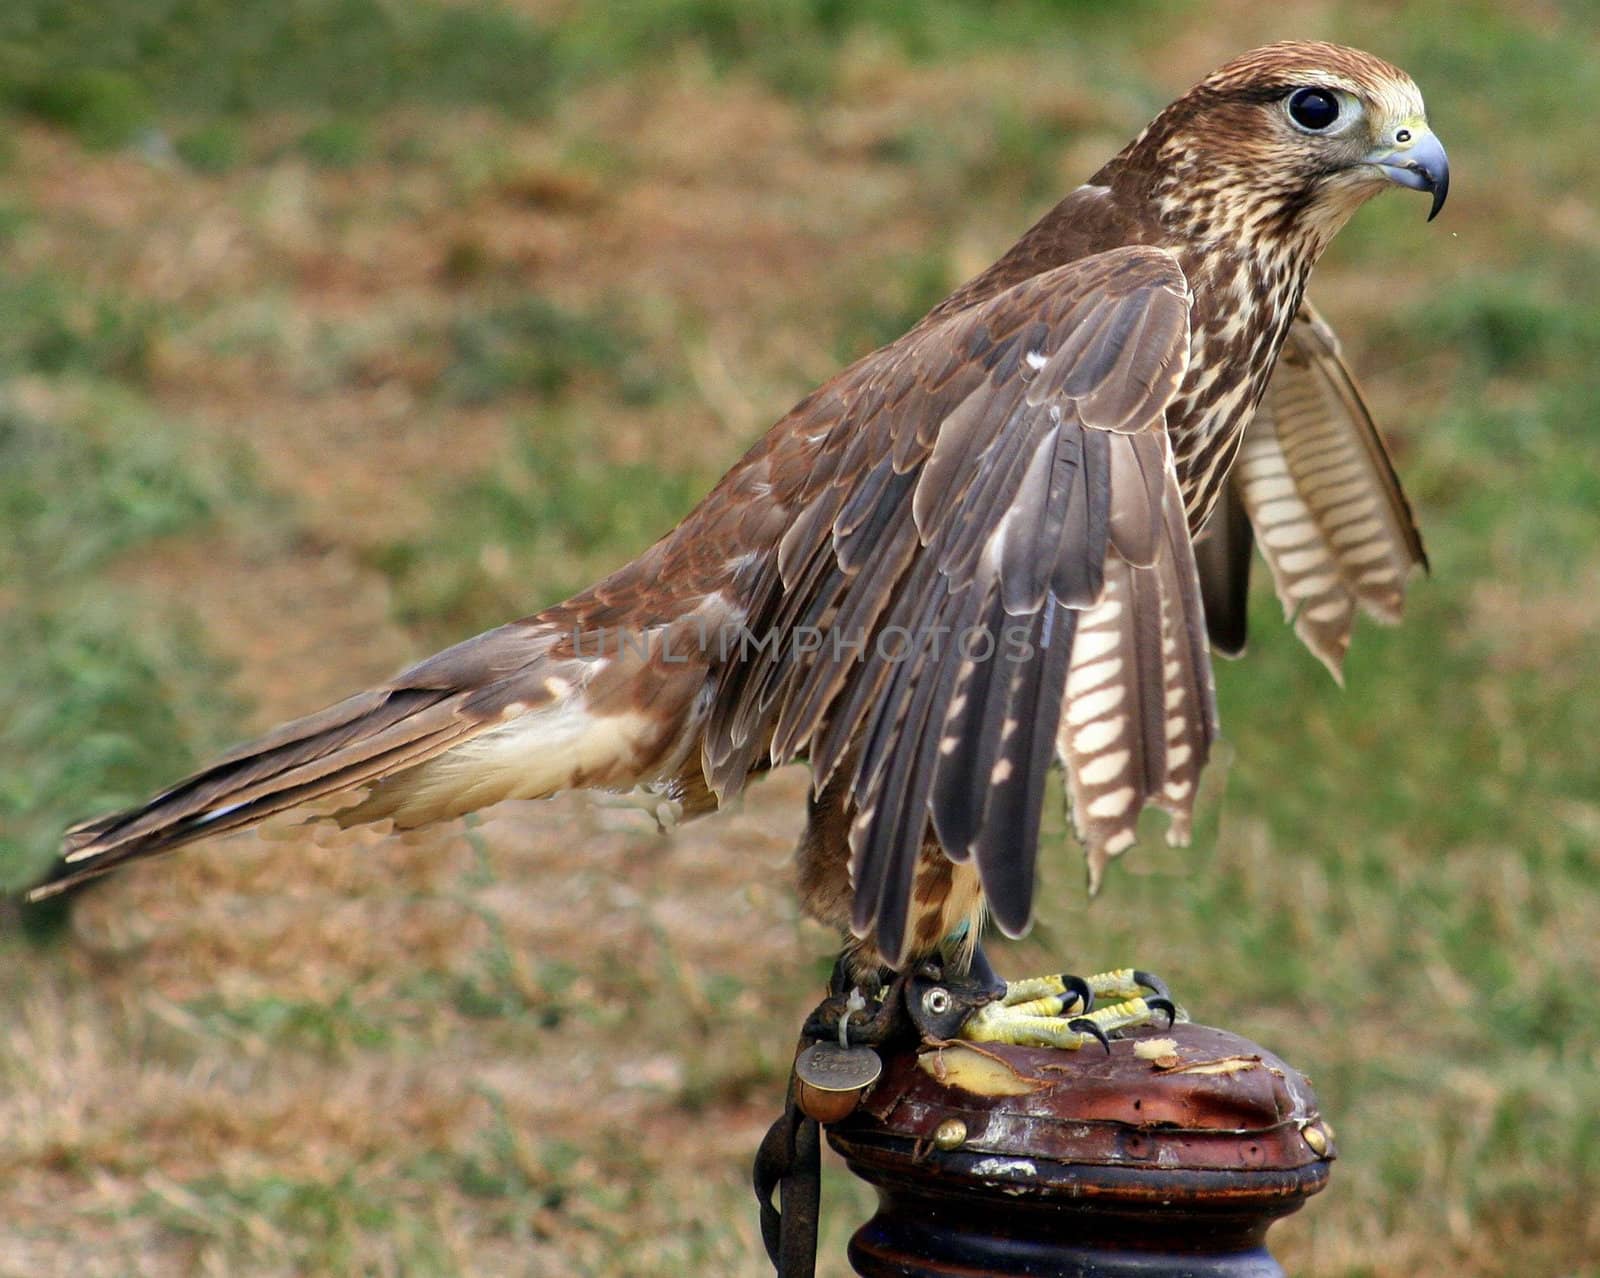 A kestral at a country show in the UK.